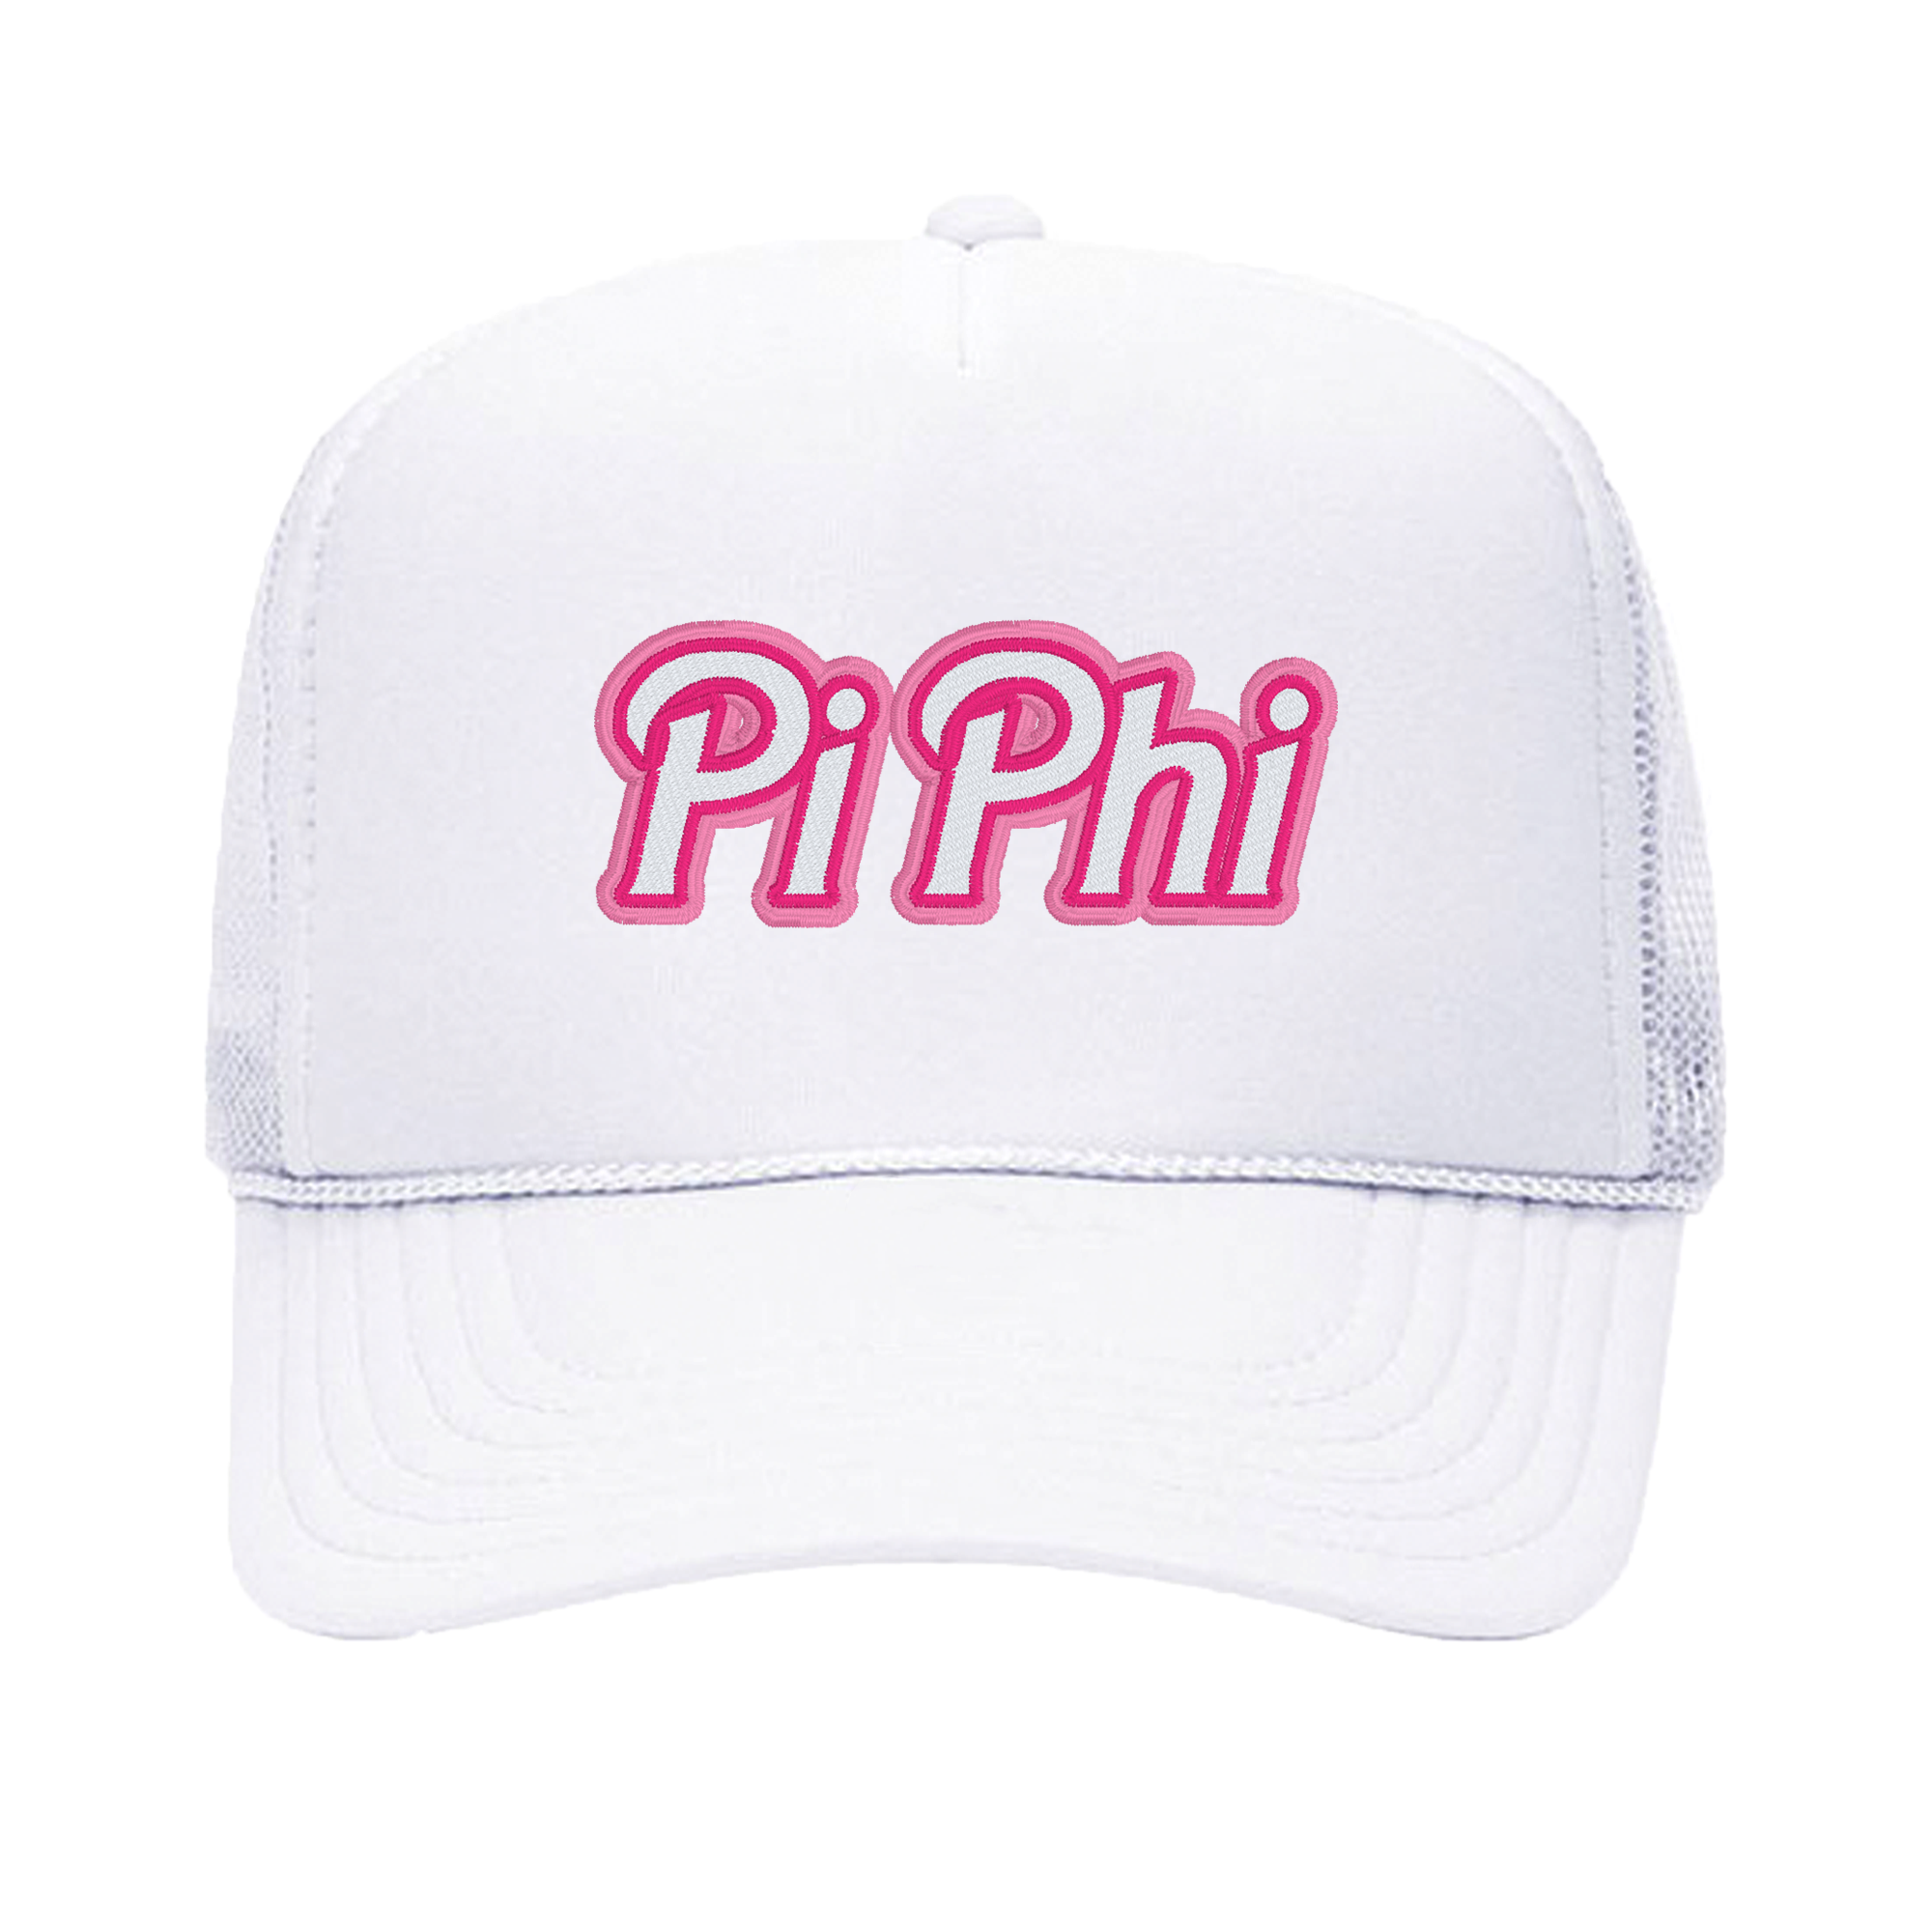 a white hat with pink letters on it